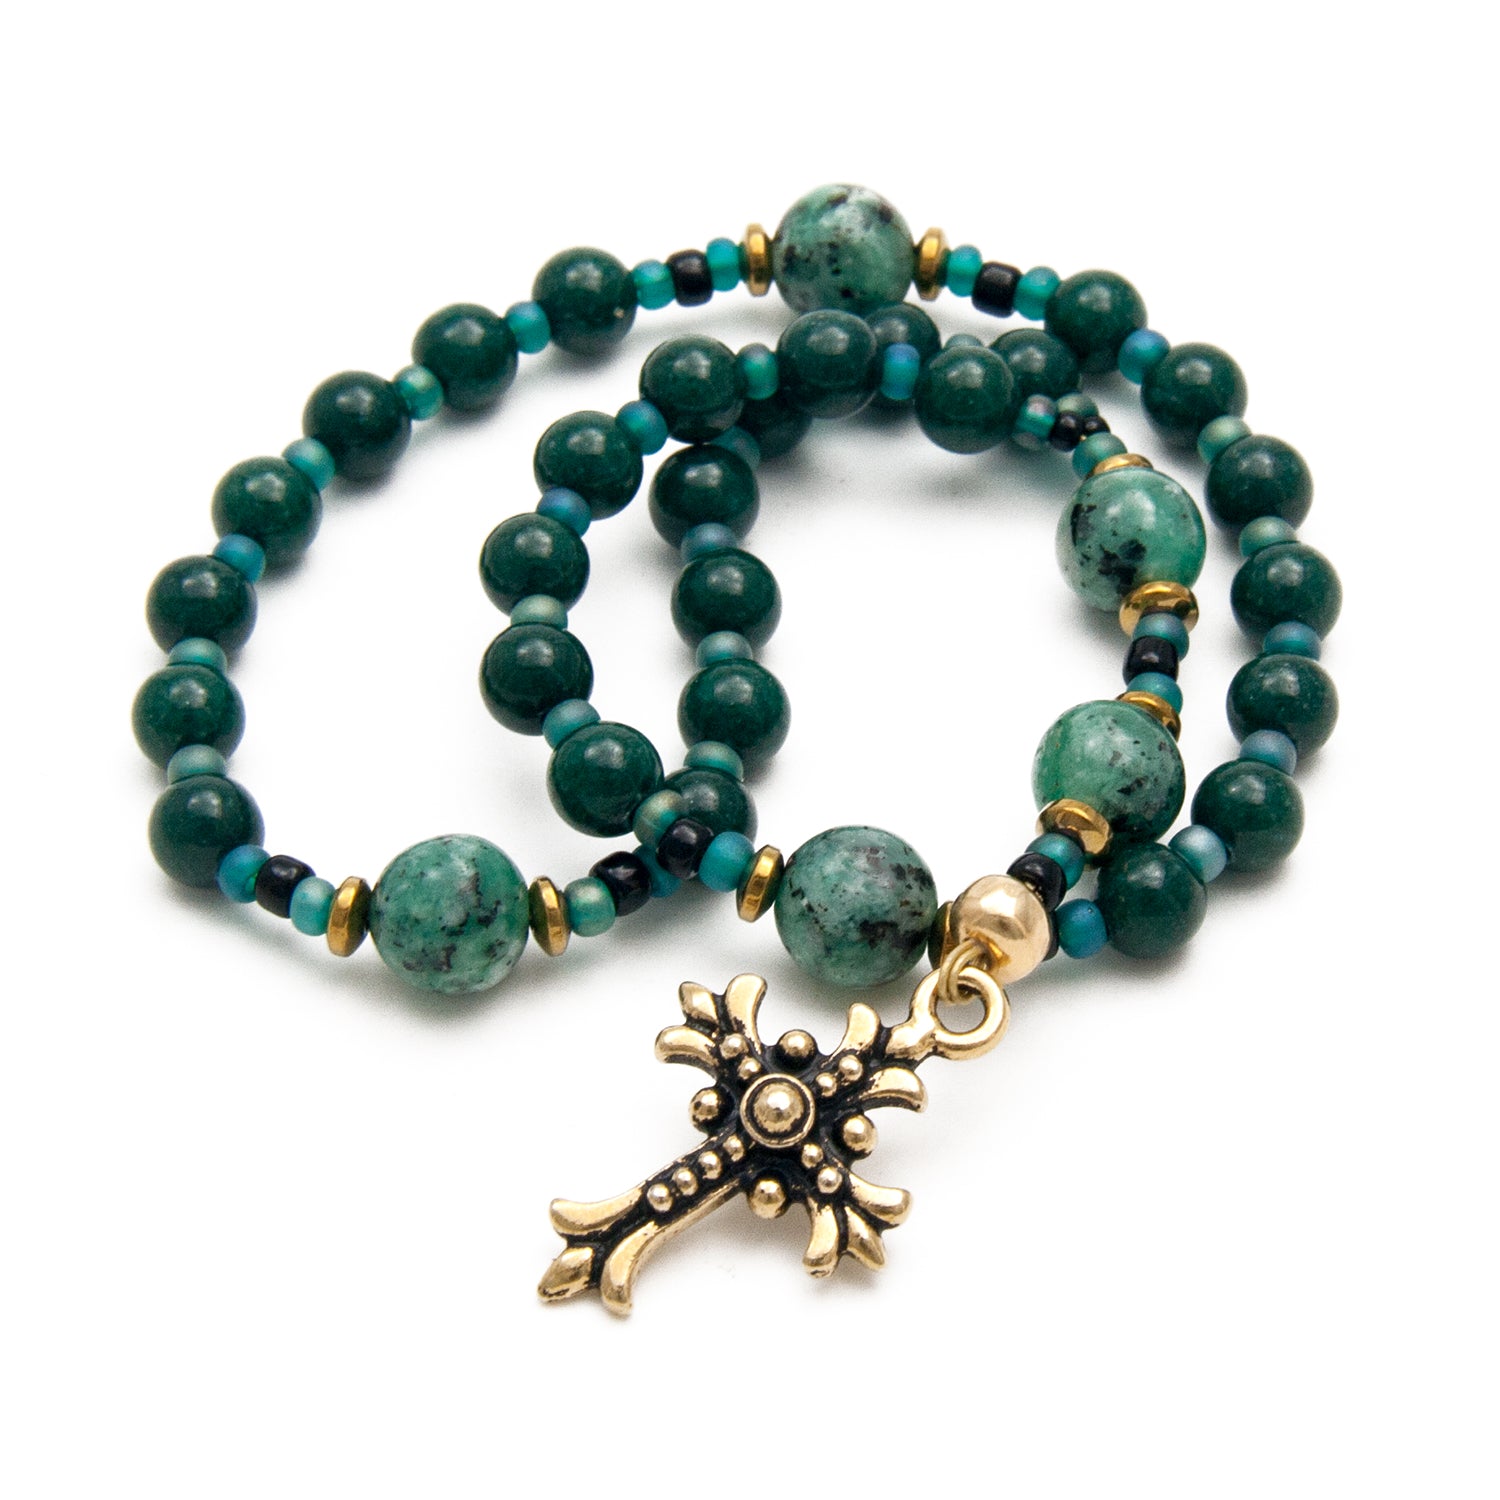 High Quality Rosaries and Prayer Beads